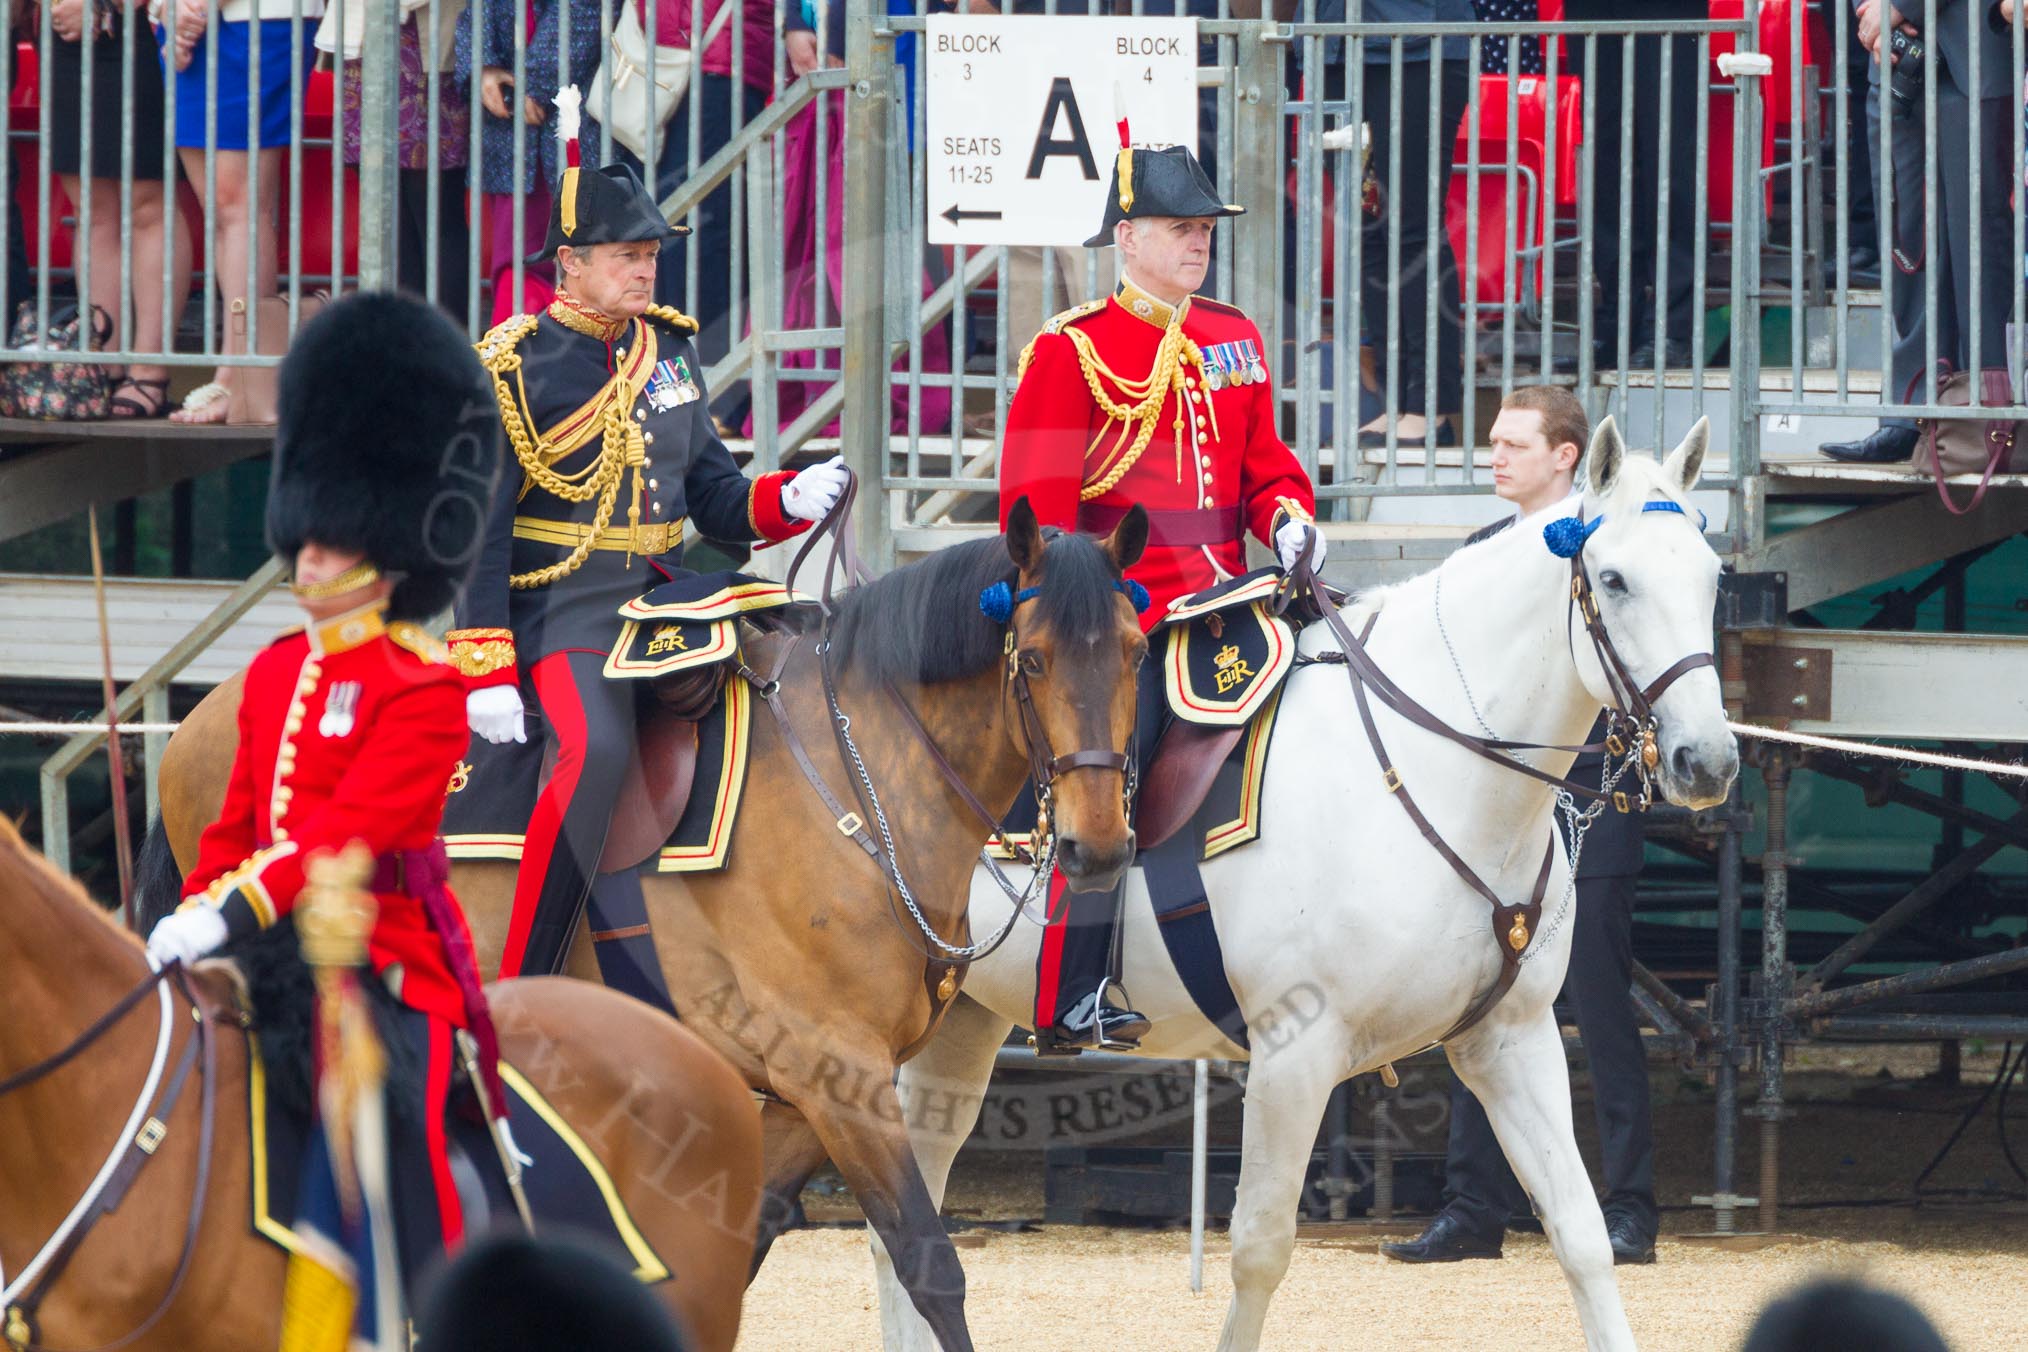 The Colonel's Review 2016.
Horse Guards Parade, Westminster,
London,

United Kingdom,
on 04 June 2016 at 10:59, image #160